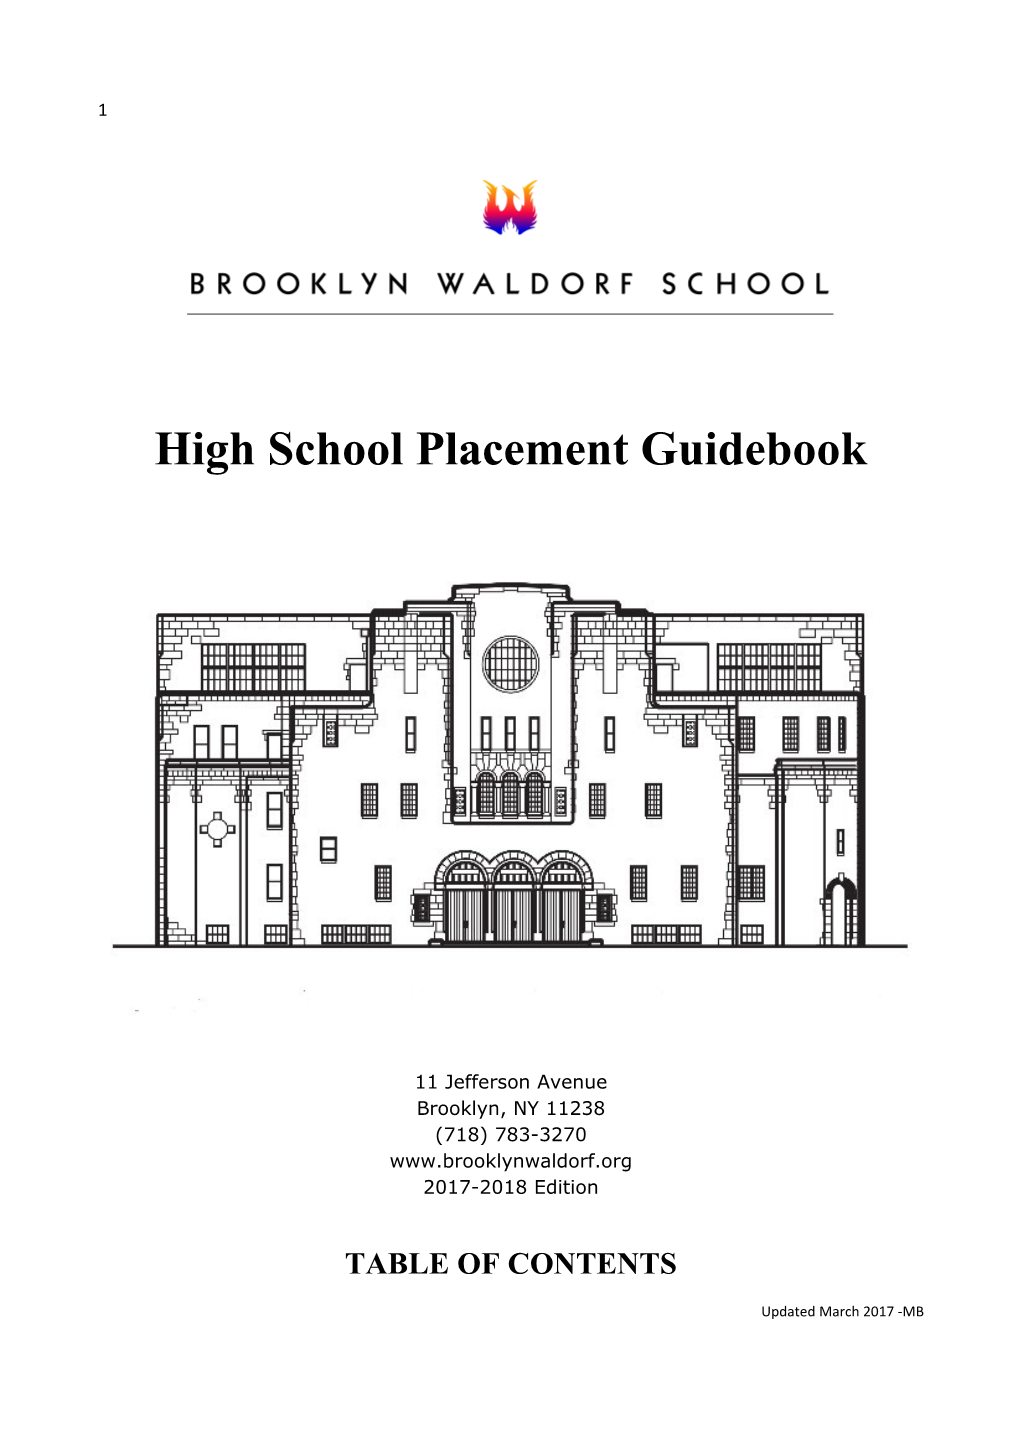 High School Placement Guidebook